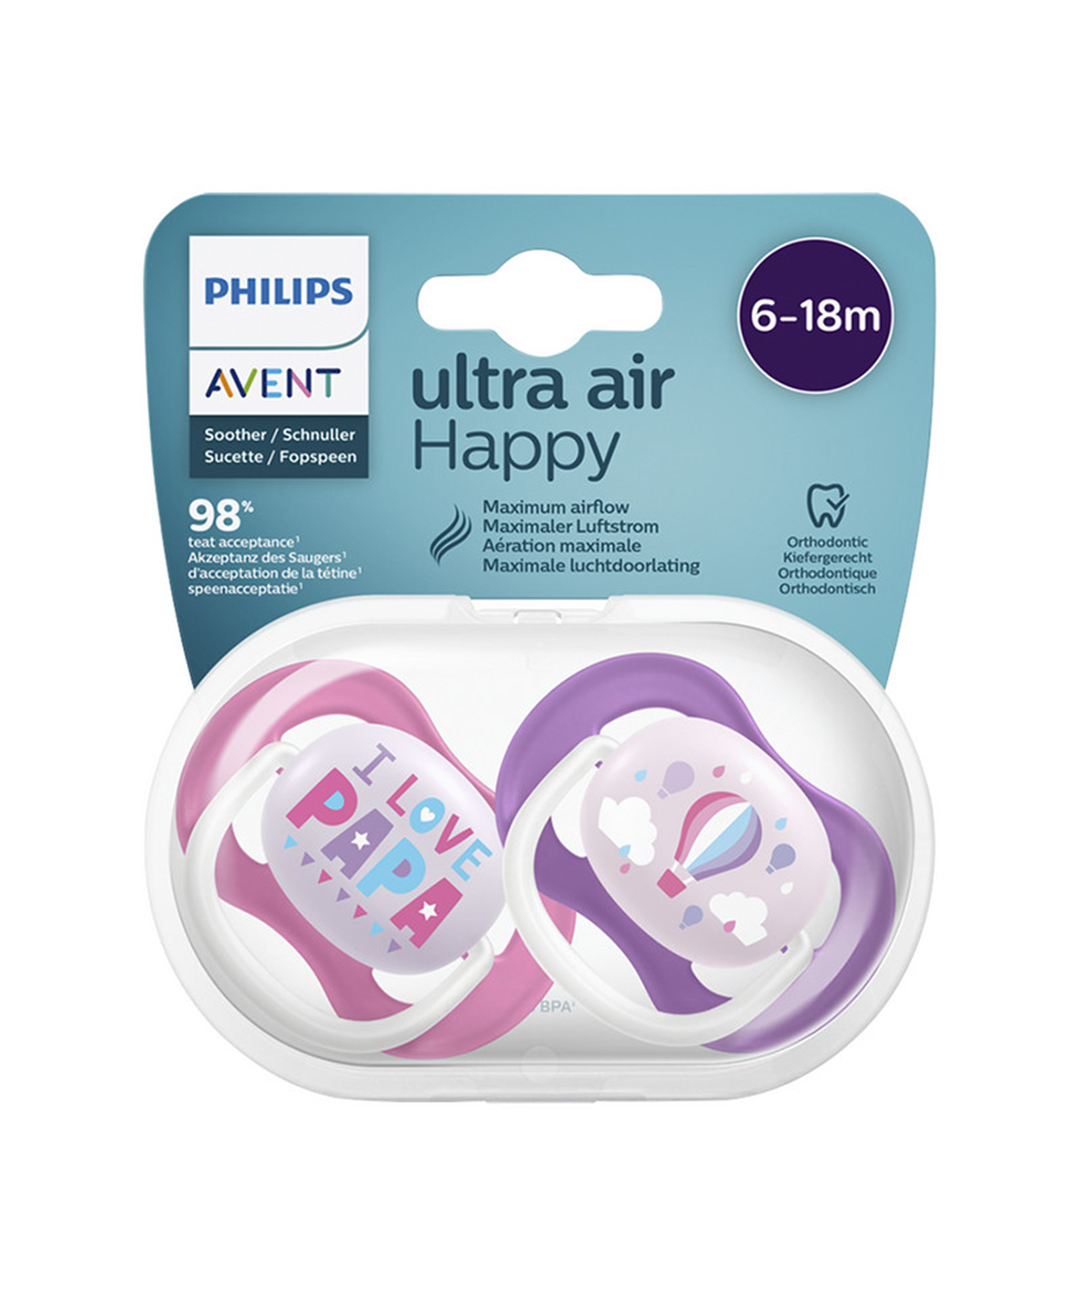 AVENT 2 Sucettes ULTRA Air Happy Filles 6-18 Mois - Citymall